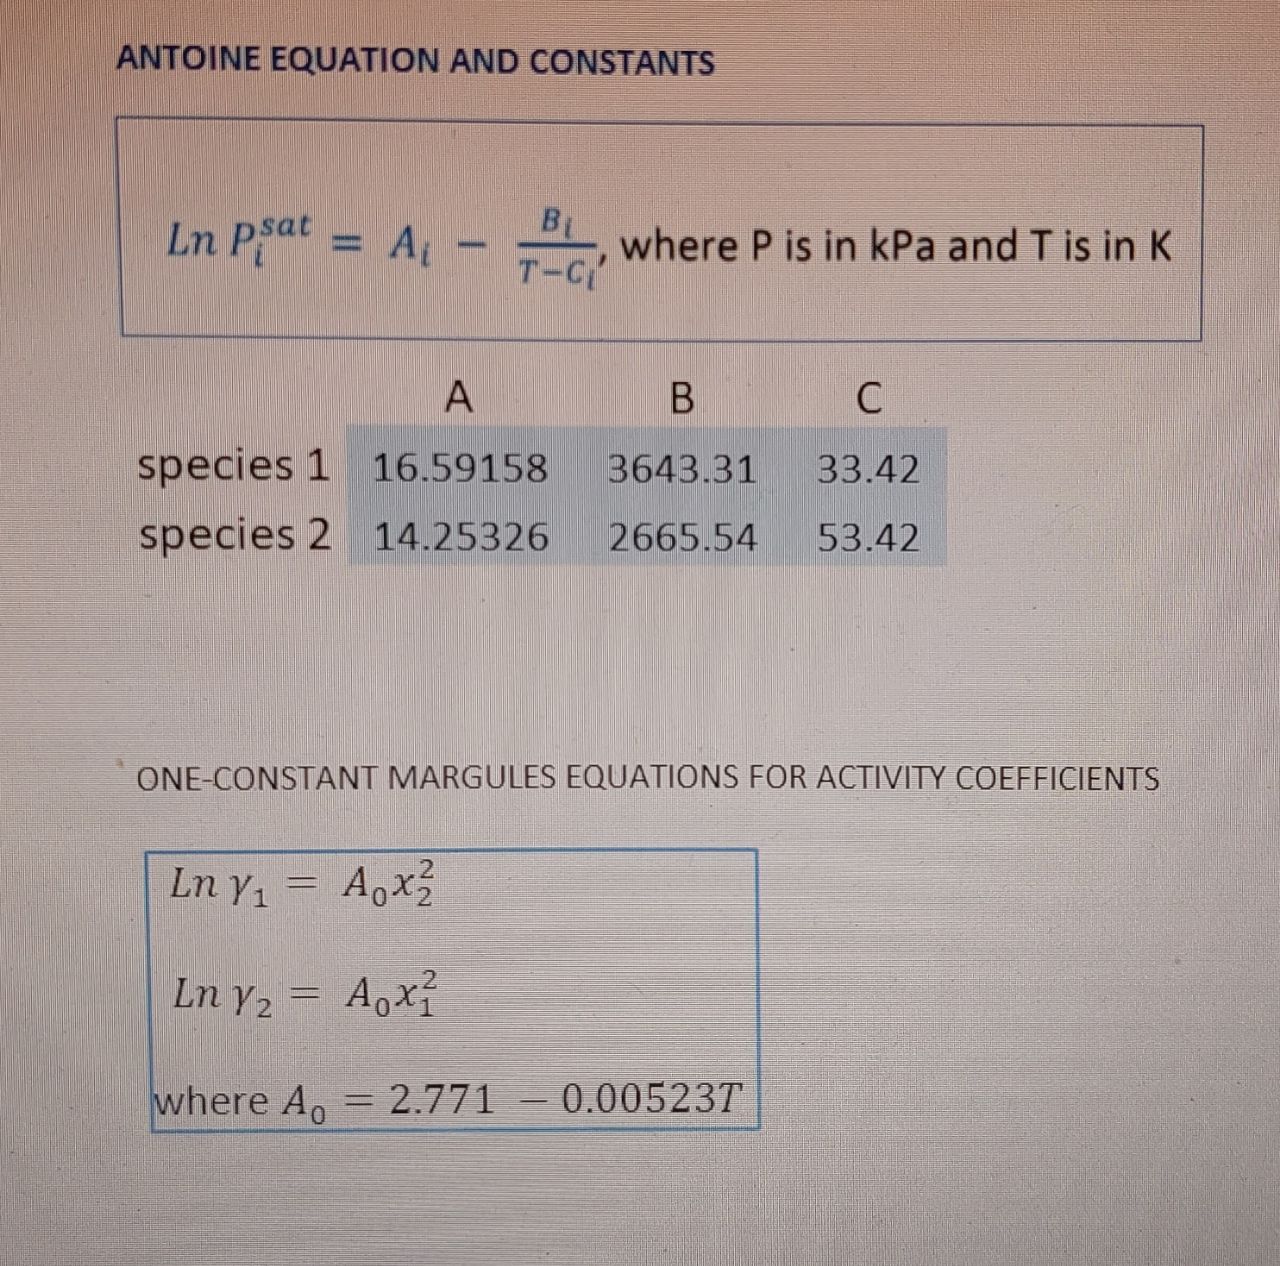 Solved 1. The NIST databases give the Antonie equation of